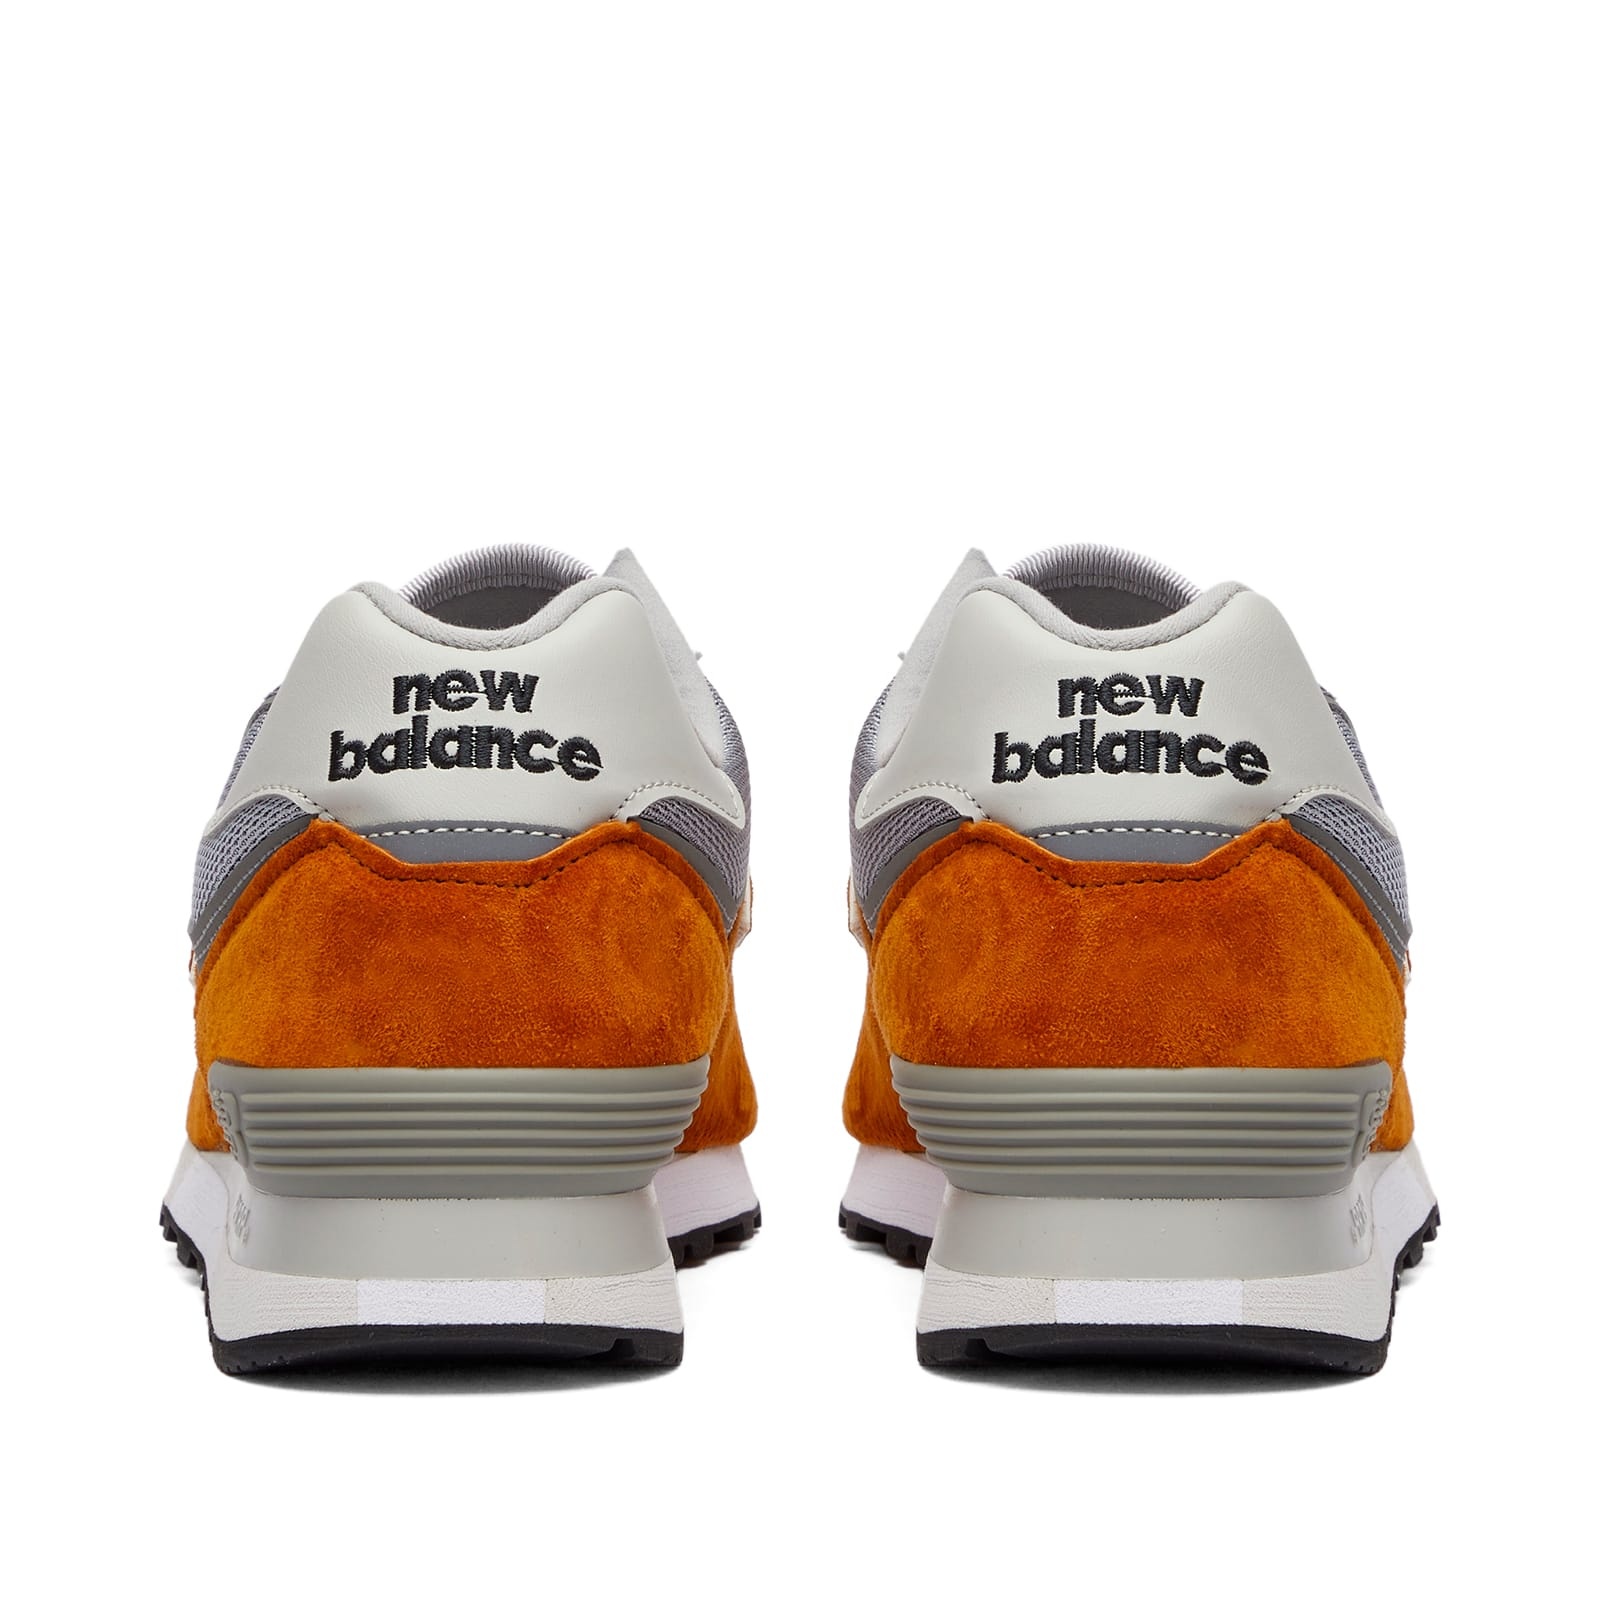 New Balance OU576OOK - Made in UK - 3